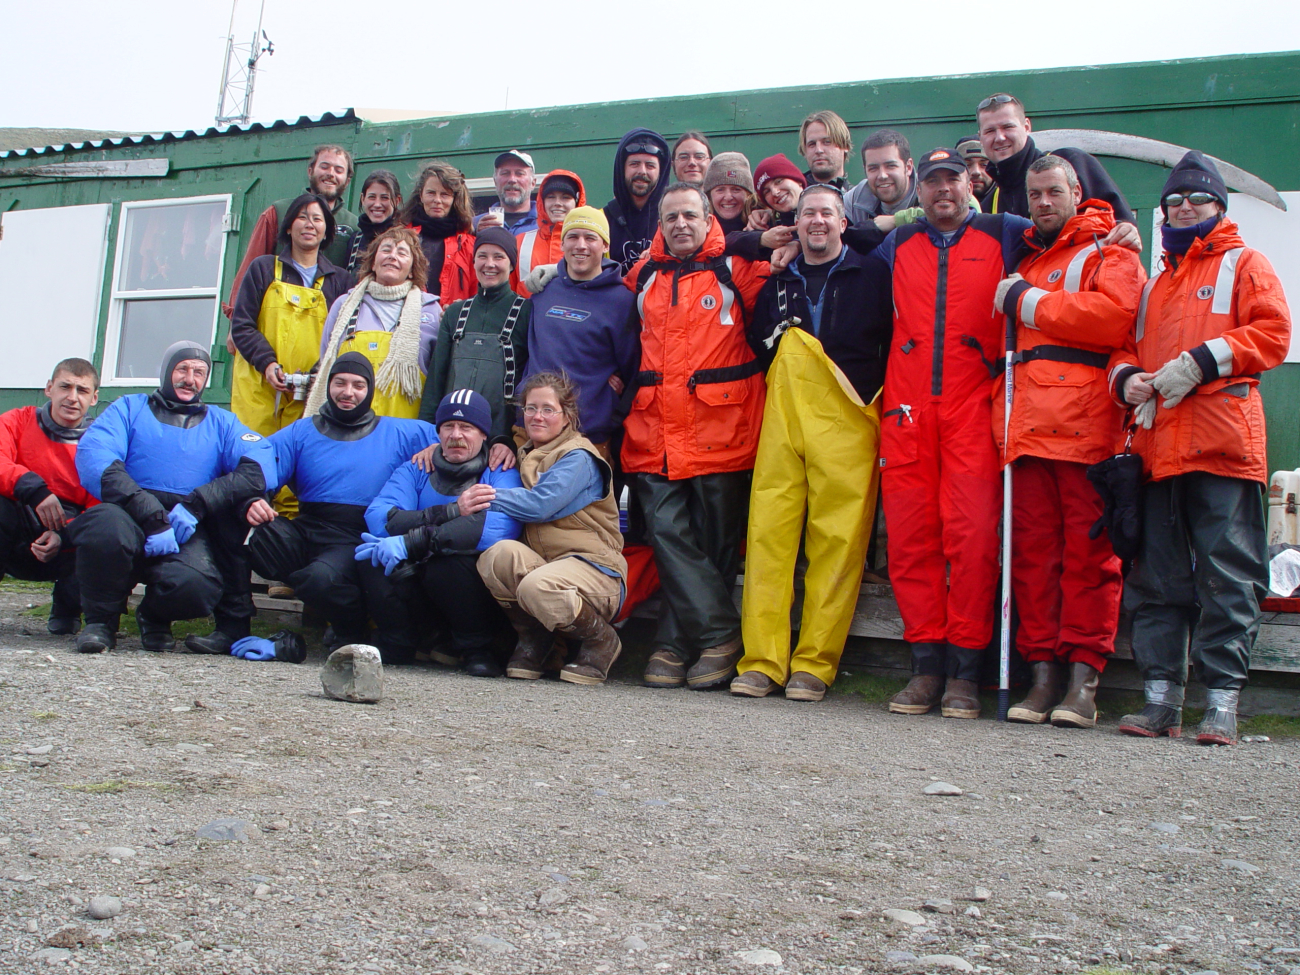 The AMLR science team at the Copacabana field station, King George Island, 2006